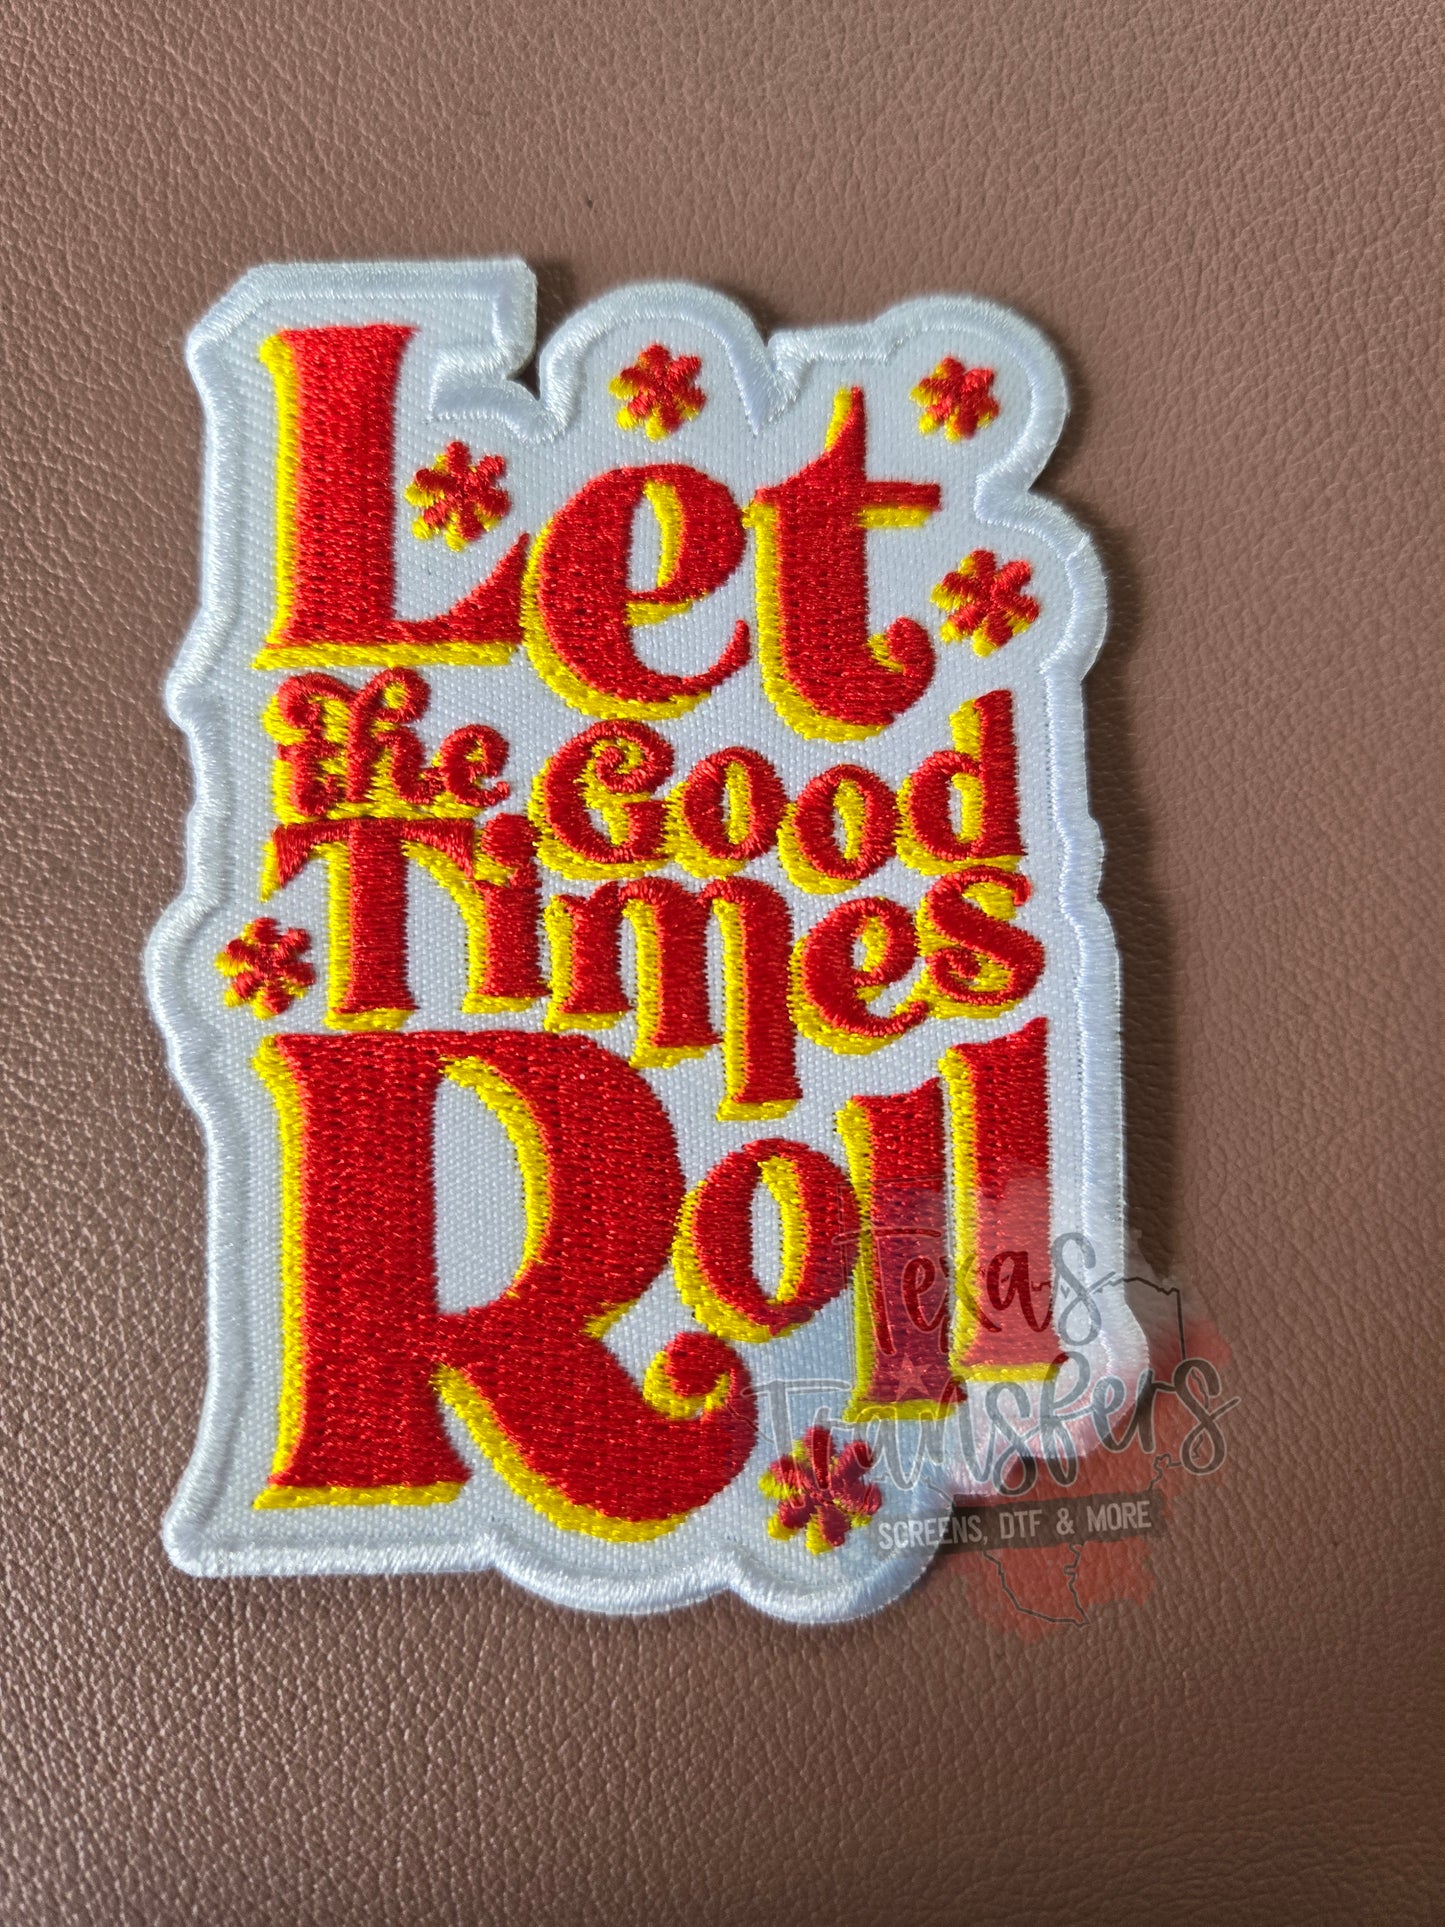 Let the Good Times Roll Iron-On PATCH